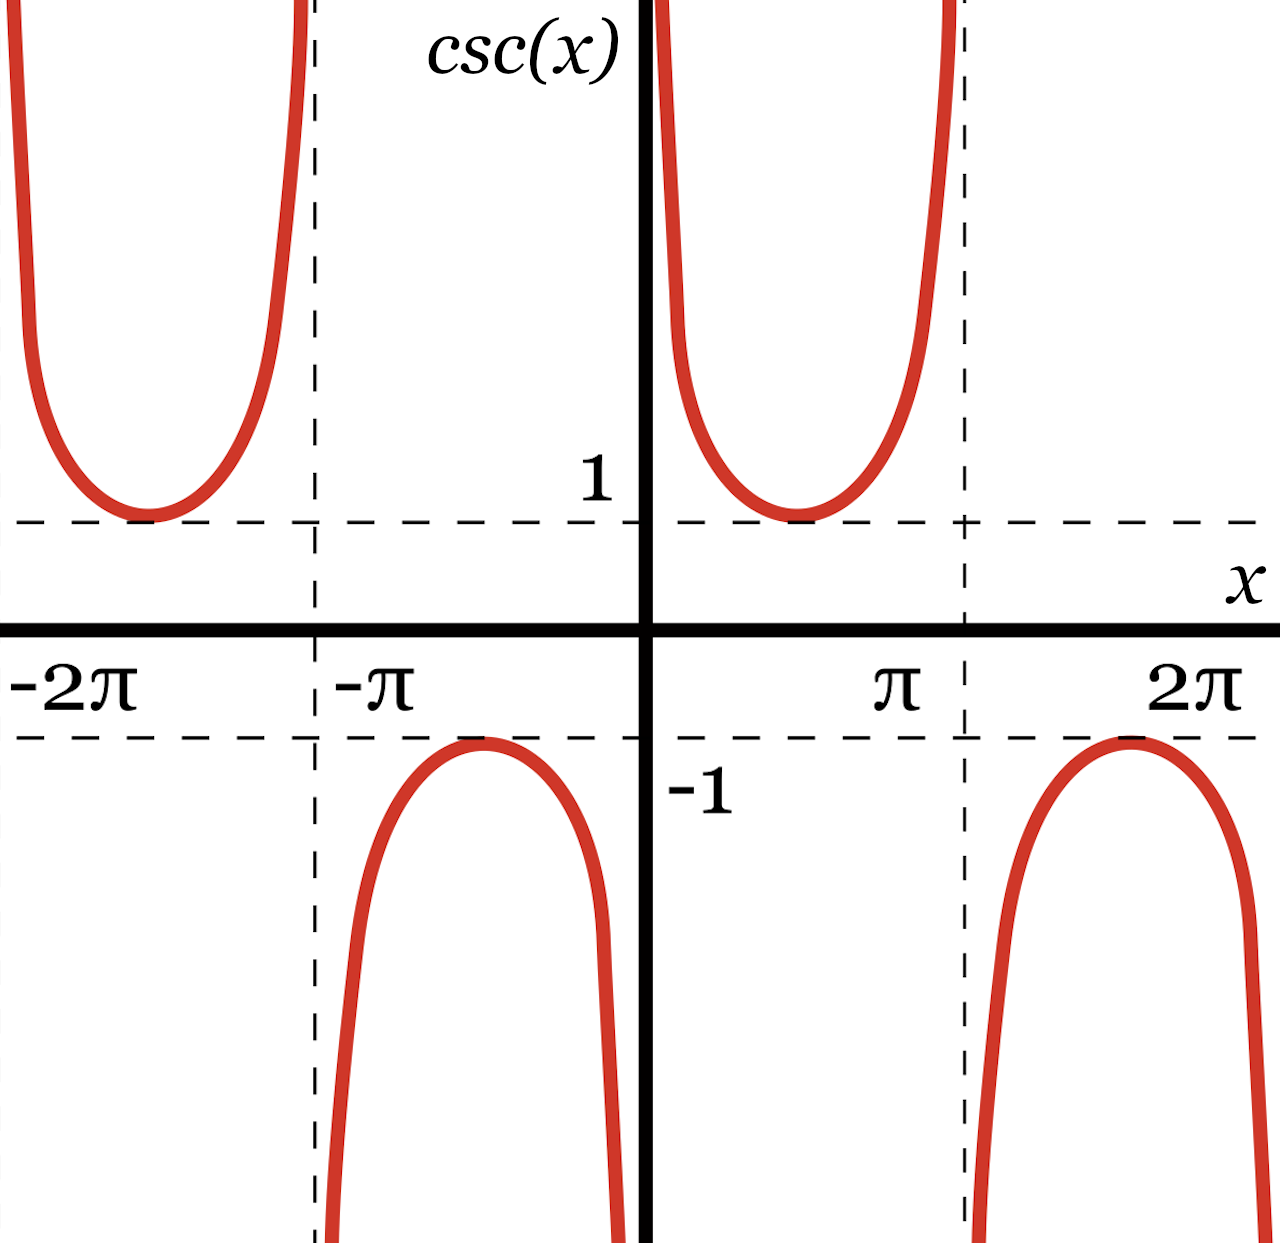 graph of the repeating curves representing possible cosecant values